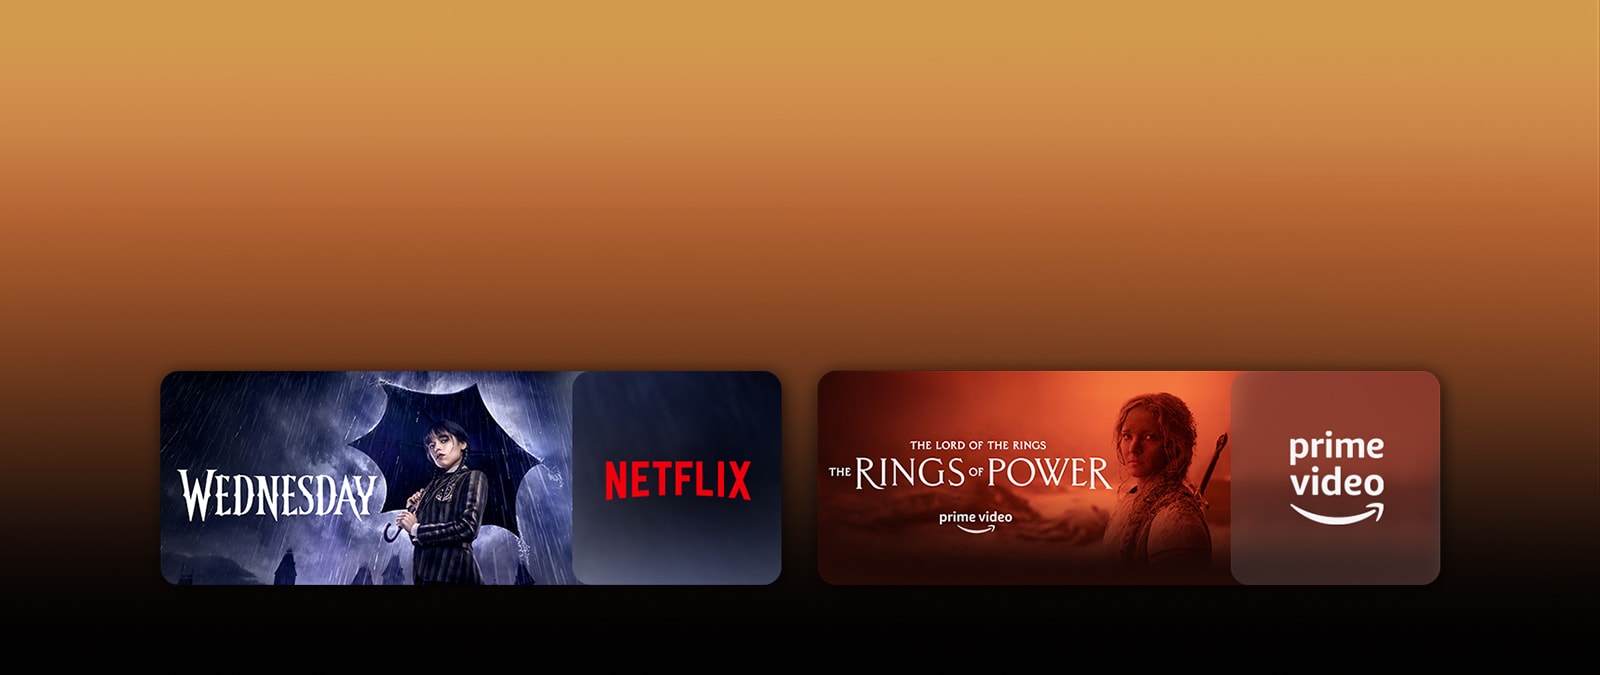 There are logos of streaming service platforms and matching footages right next to each logo. There are images of Netflix's Wednesday, Apple TV's TED LASSO and PRIME VIDEO's The rings of power.